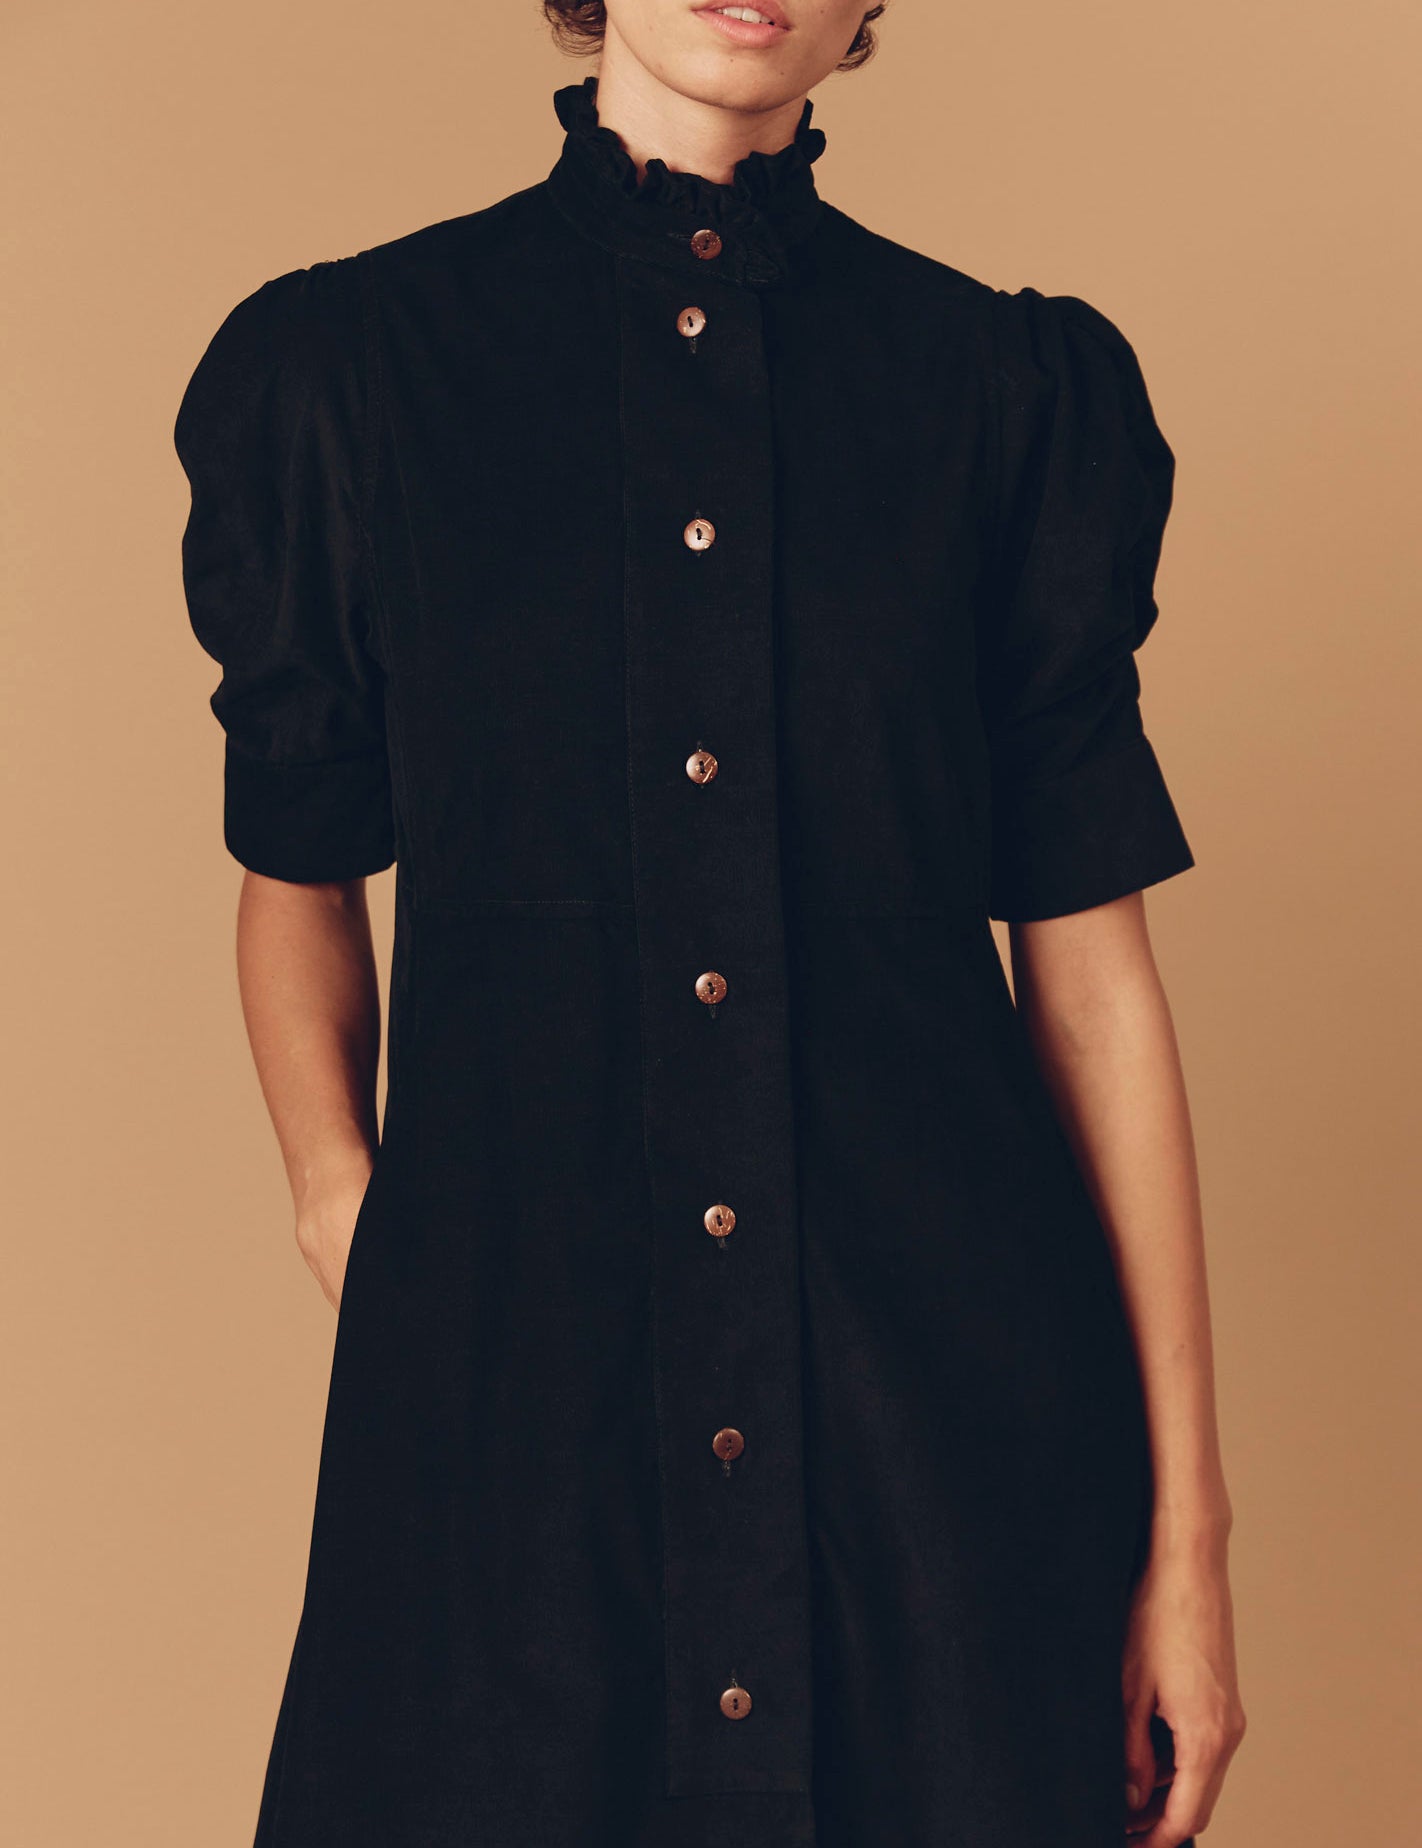 Close up Front view of Venetia Black Plain Corduroy Dress by Thierry Colson